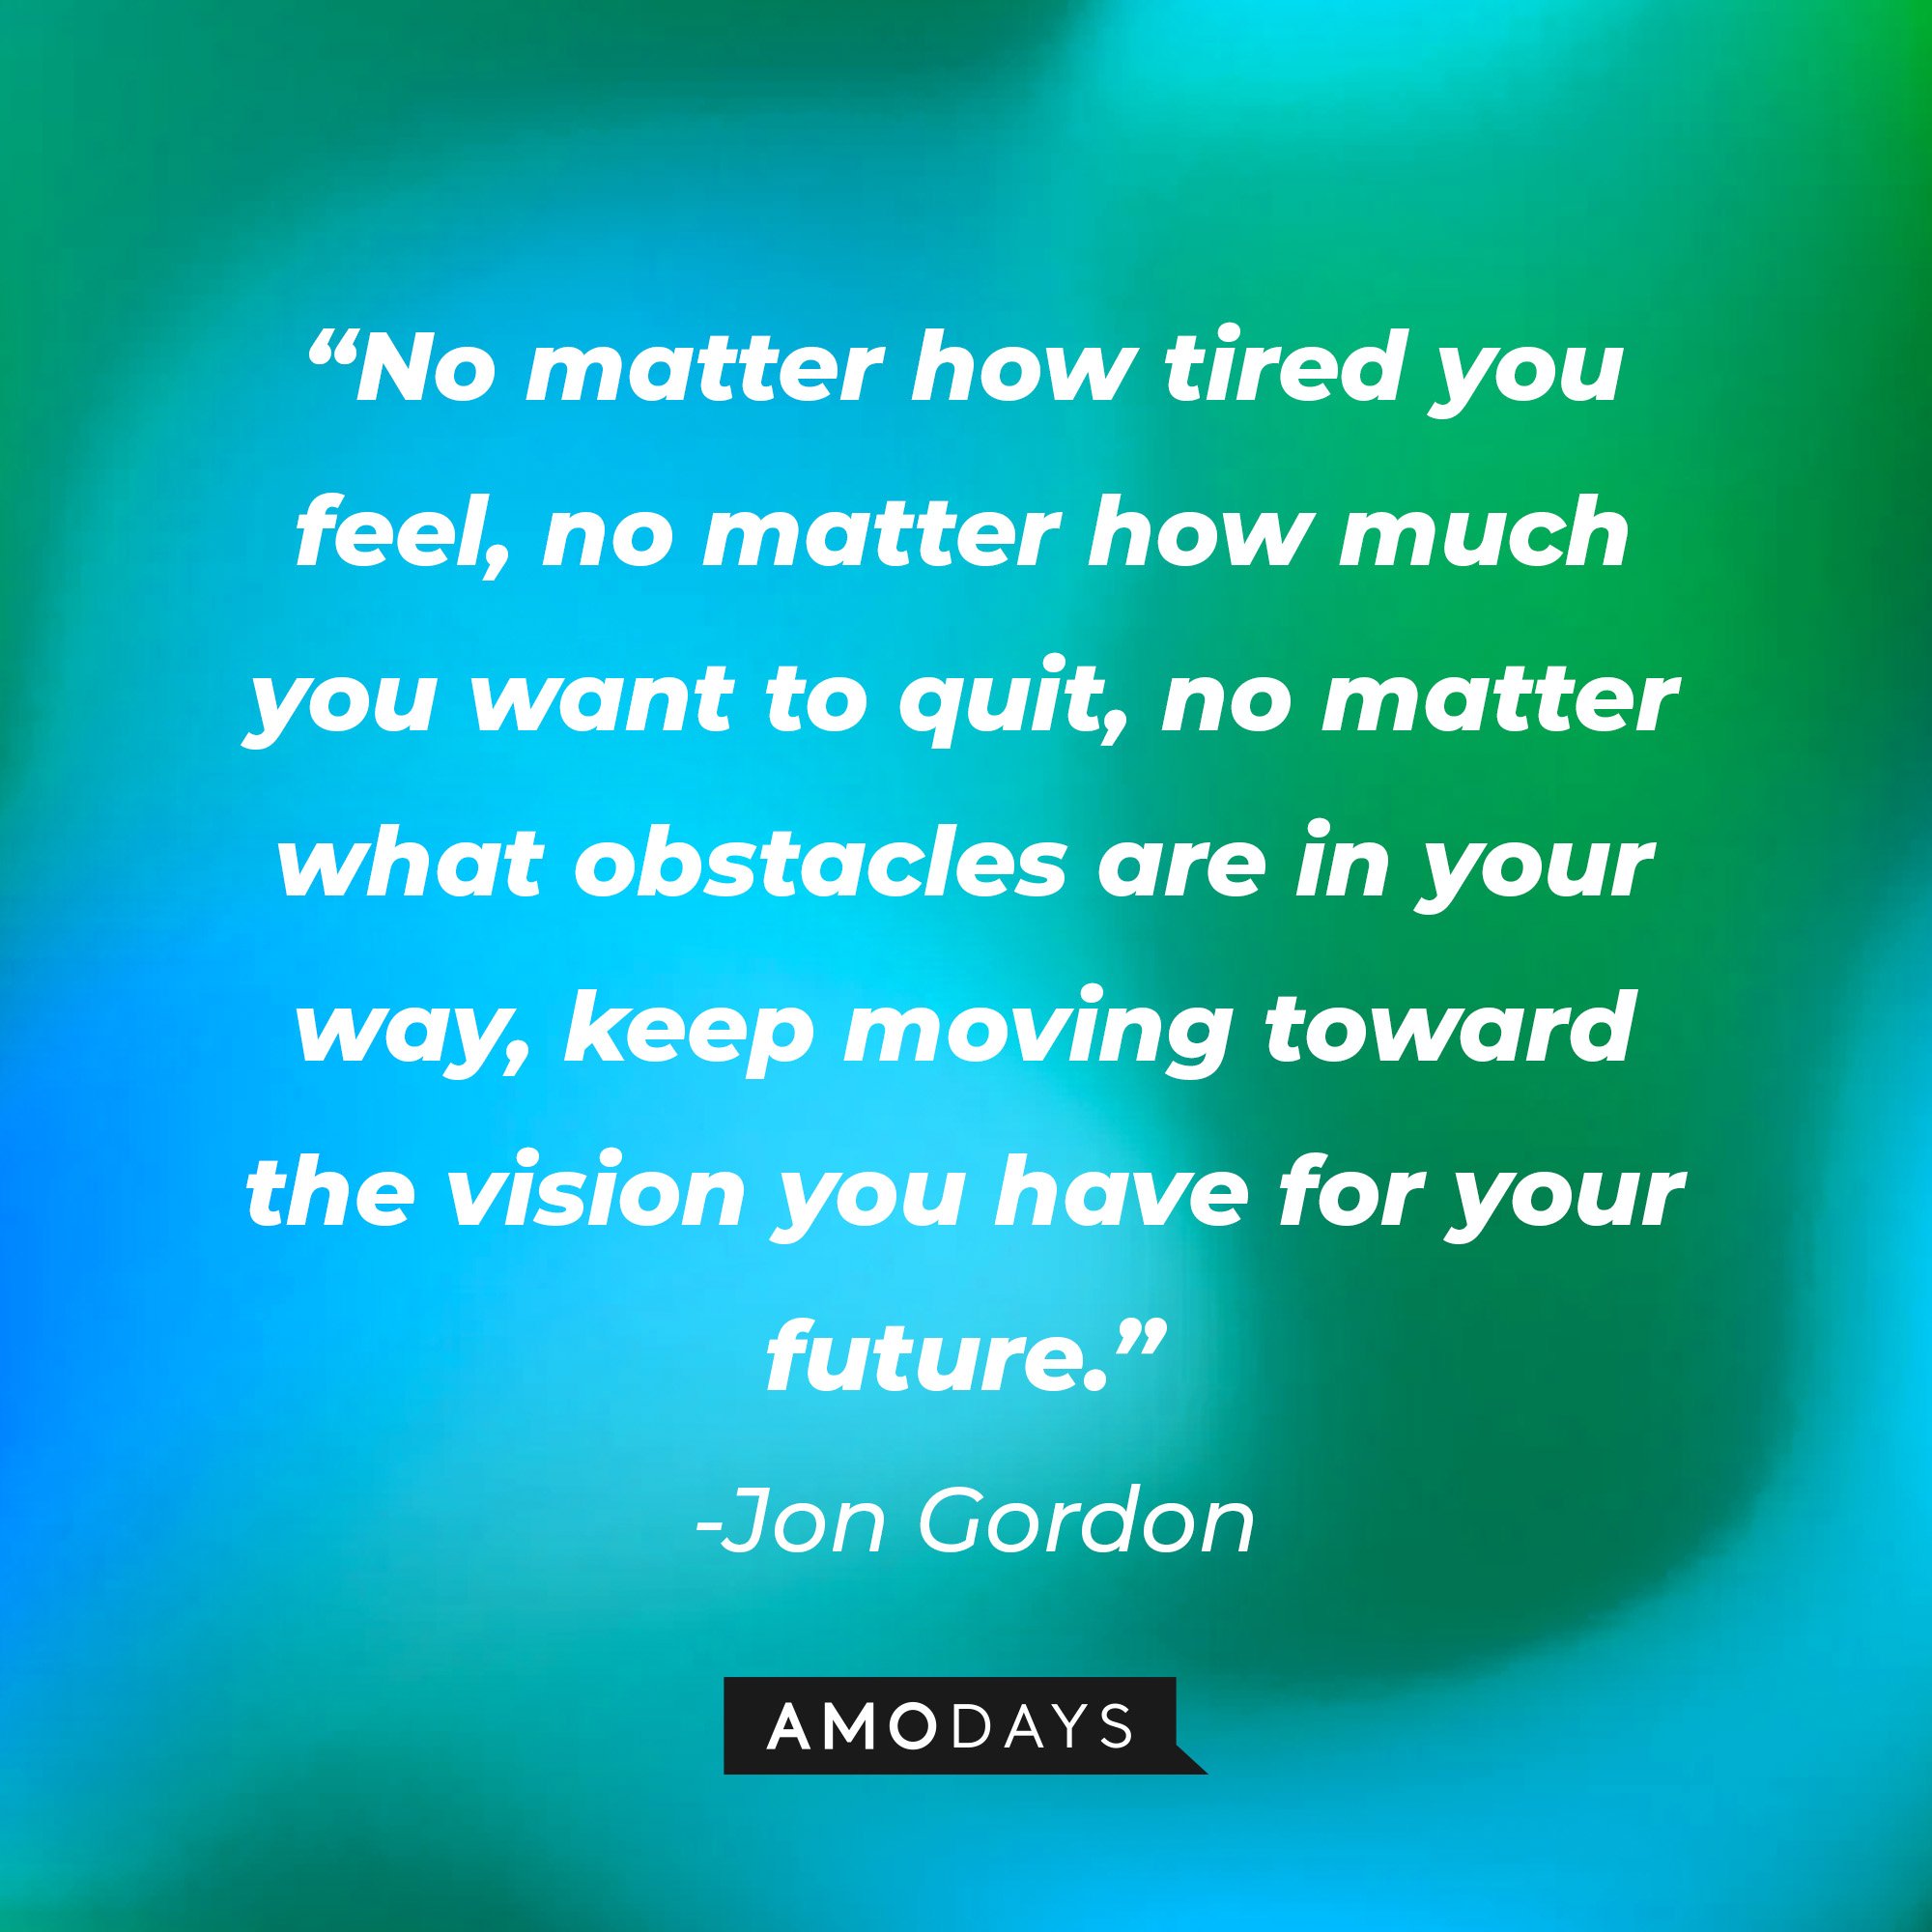 Jon Gordon's quote: “No matter how tired you feel, no matter how much you want to quit, no matter what obstacles are in your way, keep moving toward the vision you have for your future.” | Image: AmoDays